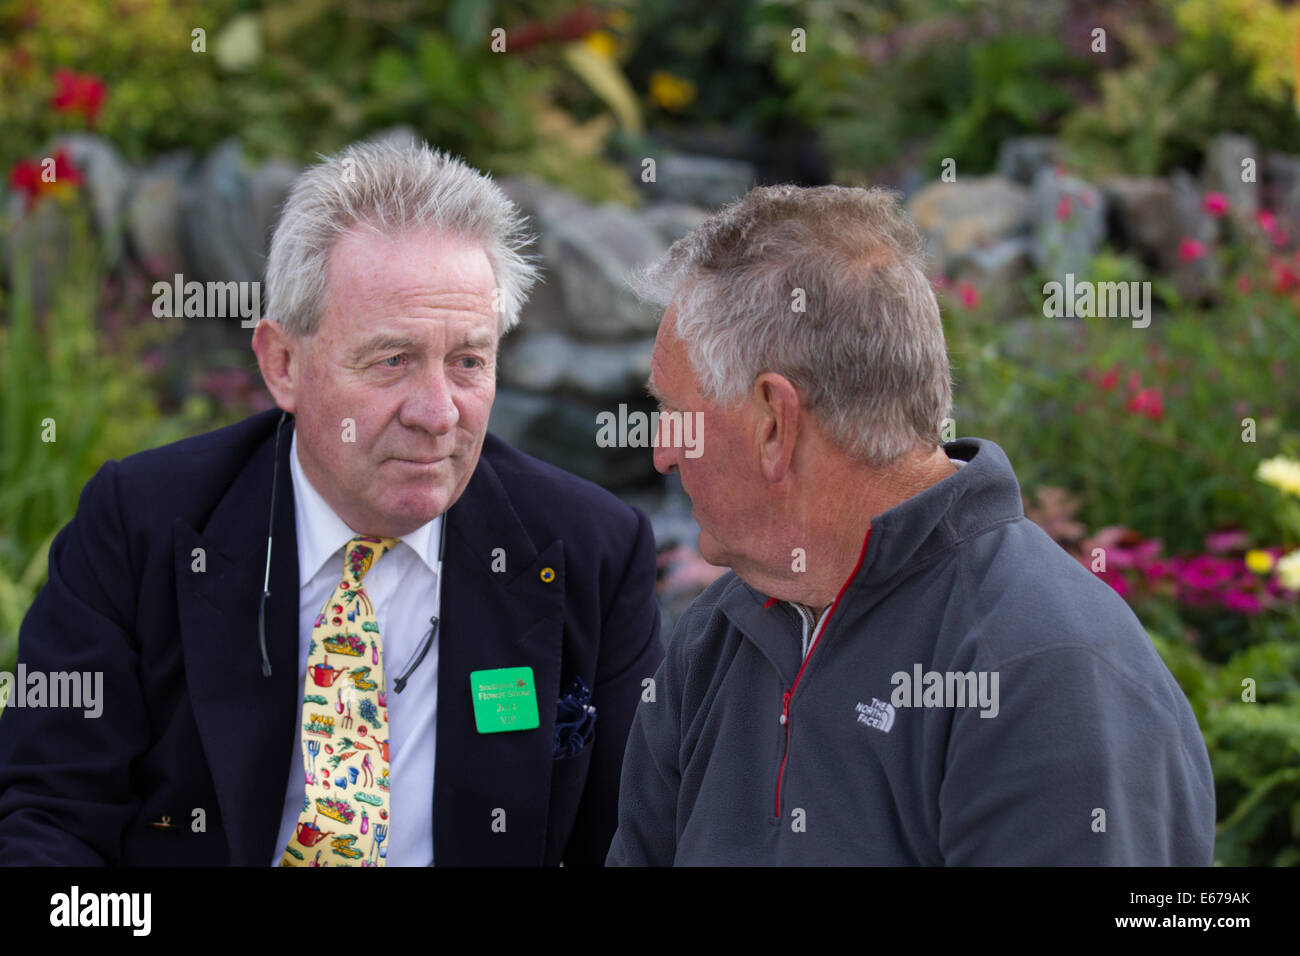 Southport, Merseyside, UK.  15th August, 2014.   Sir Roddy Llewellyn VIP Guest,  a UK Garden Designer with a National Certificate of Horticulture and a Surrey County Certificate in Landscape Construction, at  Britain’s biggest independent flower show, which is celebrating its 85th year Stock Photo